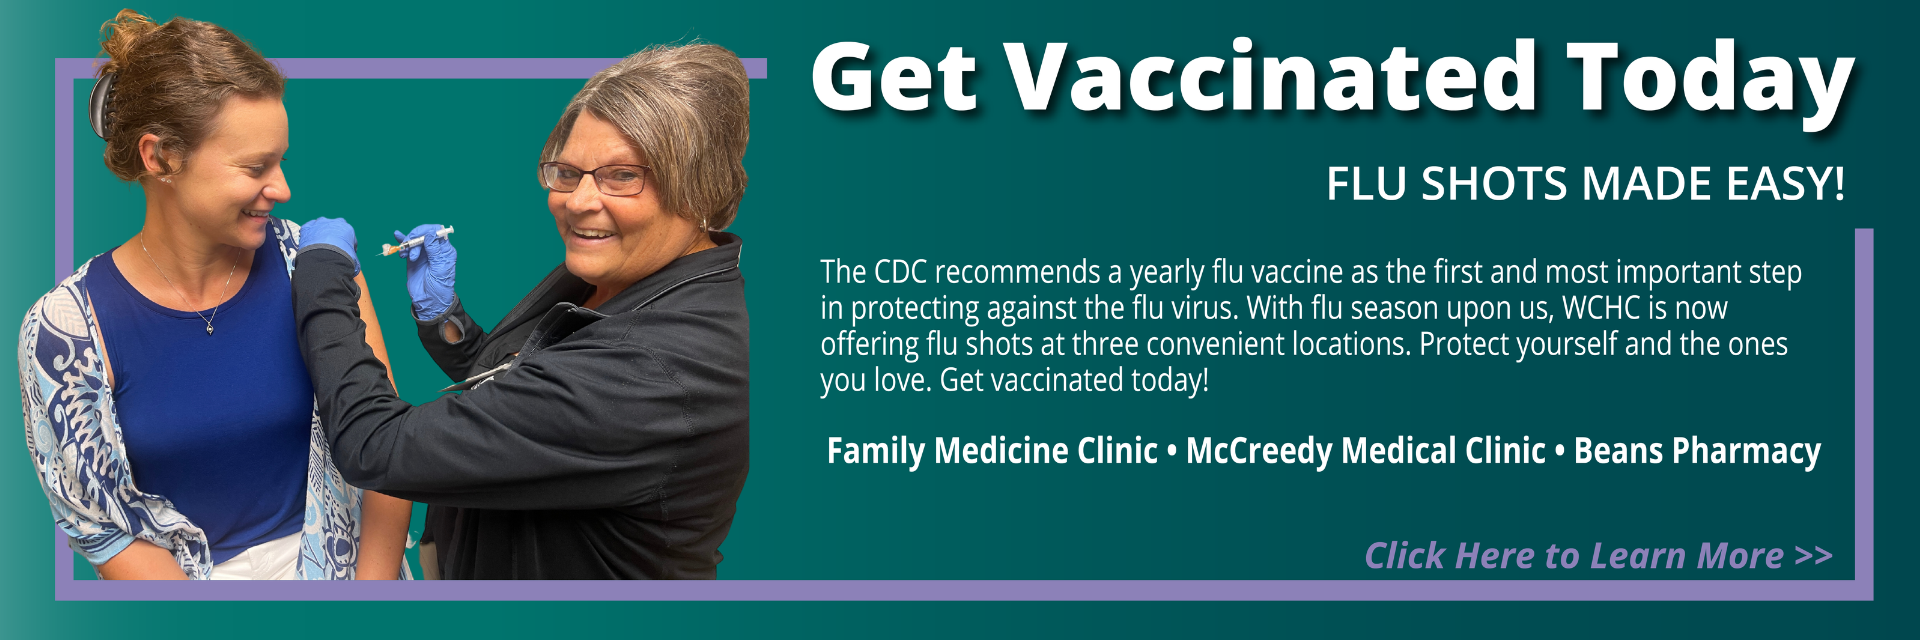 Get your flu shot today! Click here for more information